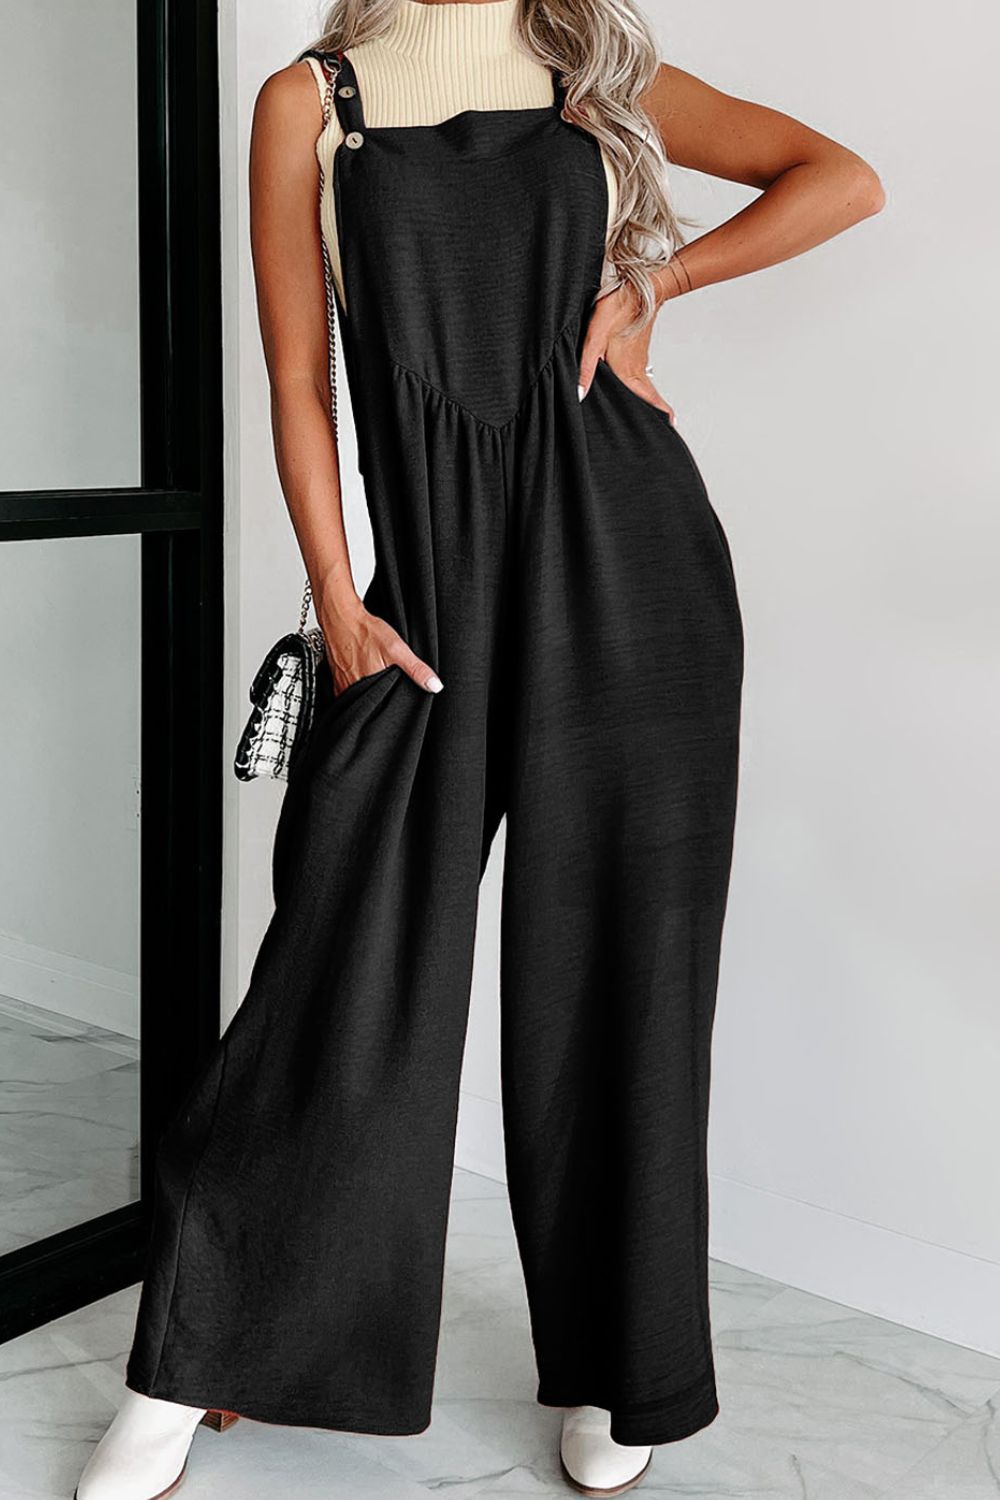 Buttoned Wide Leg Overalls Sunset and Swim Black S 